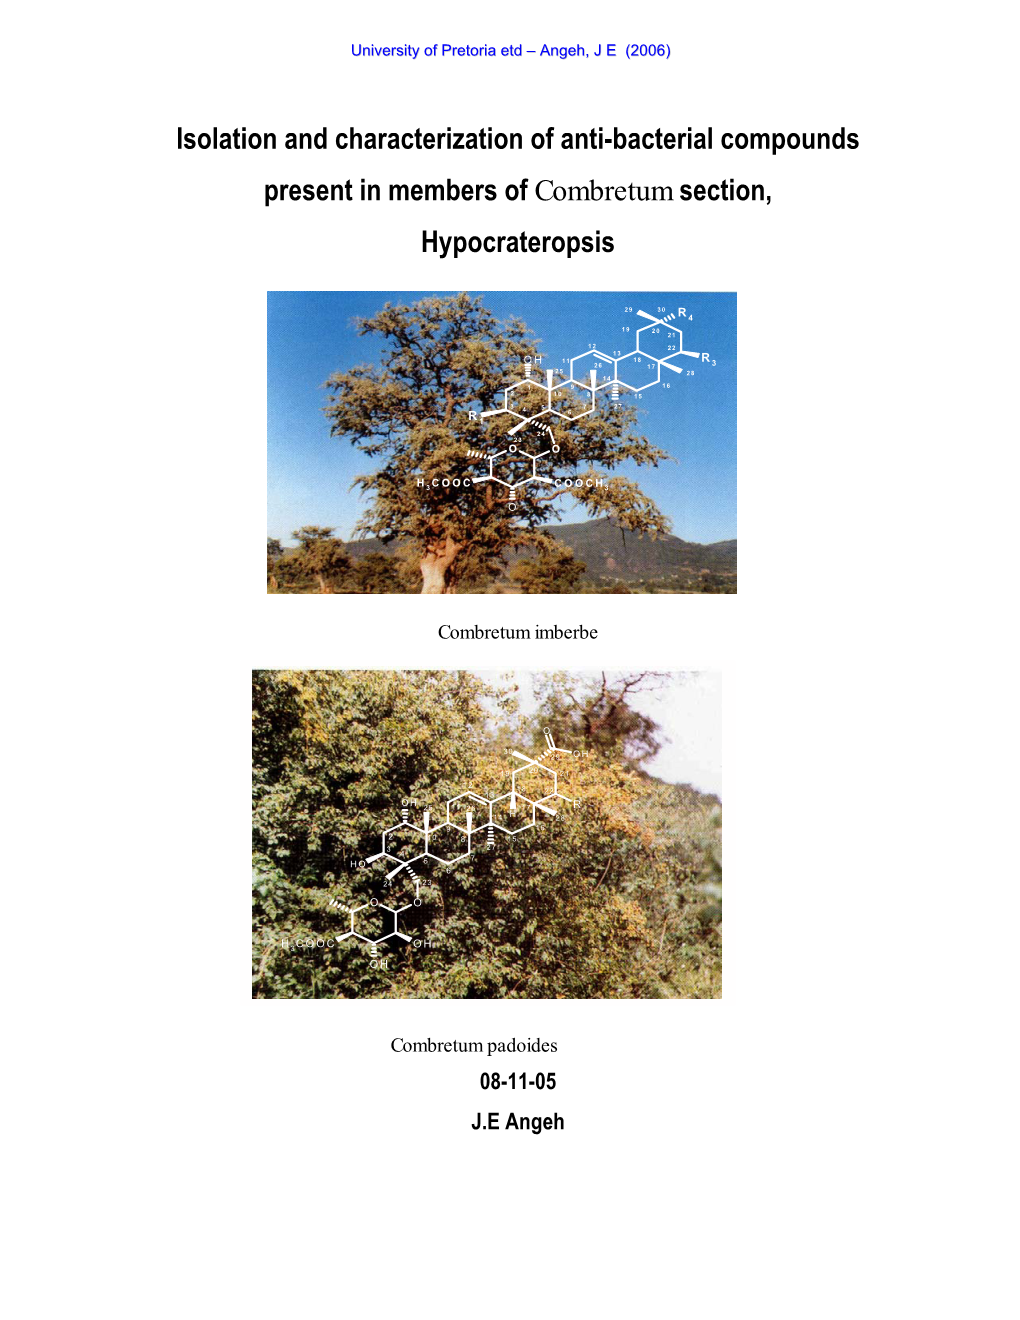 Isolation and Characterization of Anti-Bacterial Compounds Present in Members of Combretum Section, Hypocrateropsis